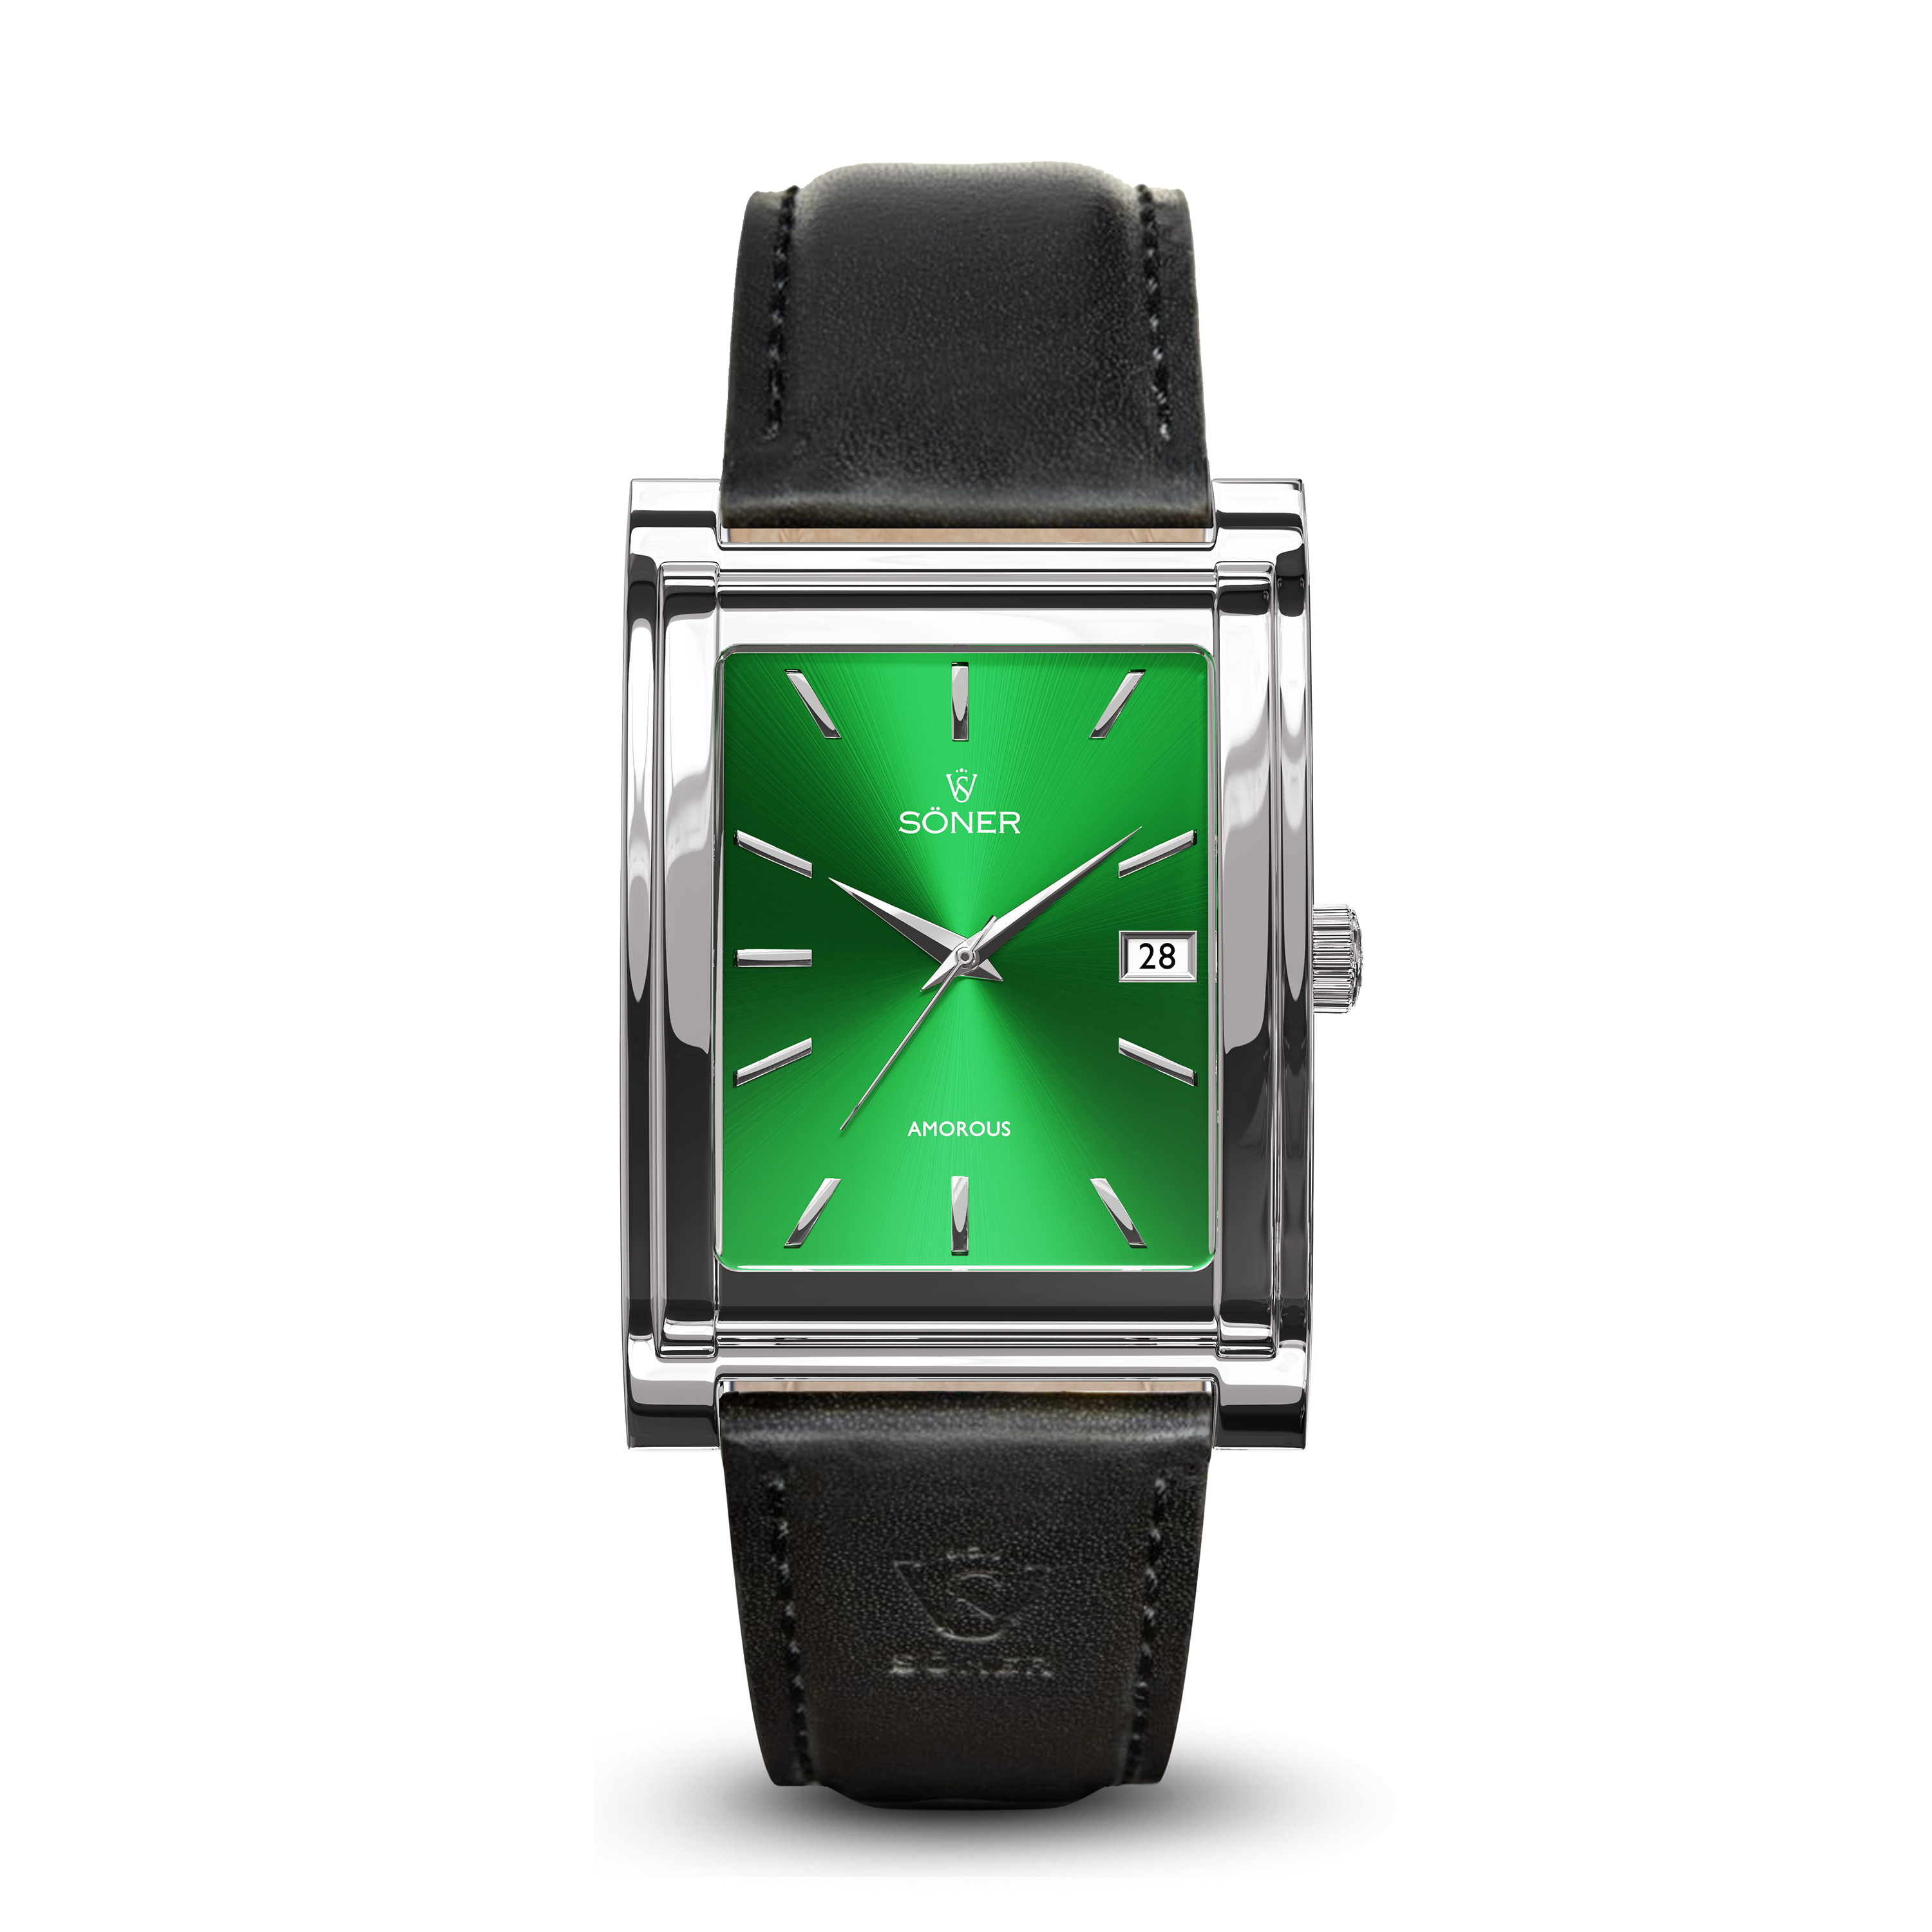 Square automatic watch, Amorous Tokyo with green dial - black leather strap front view